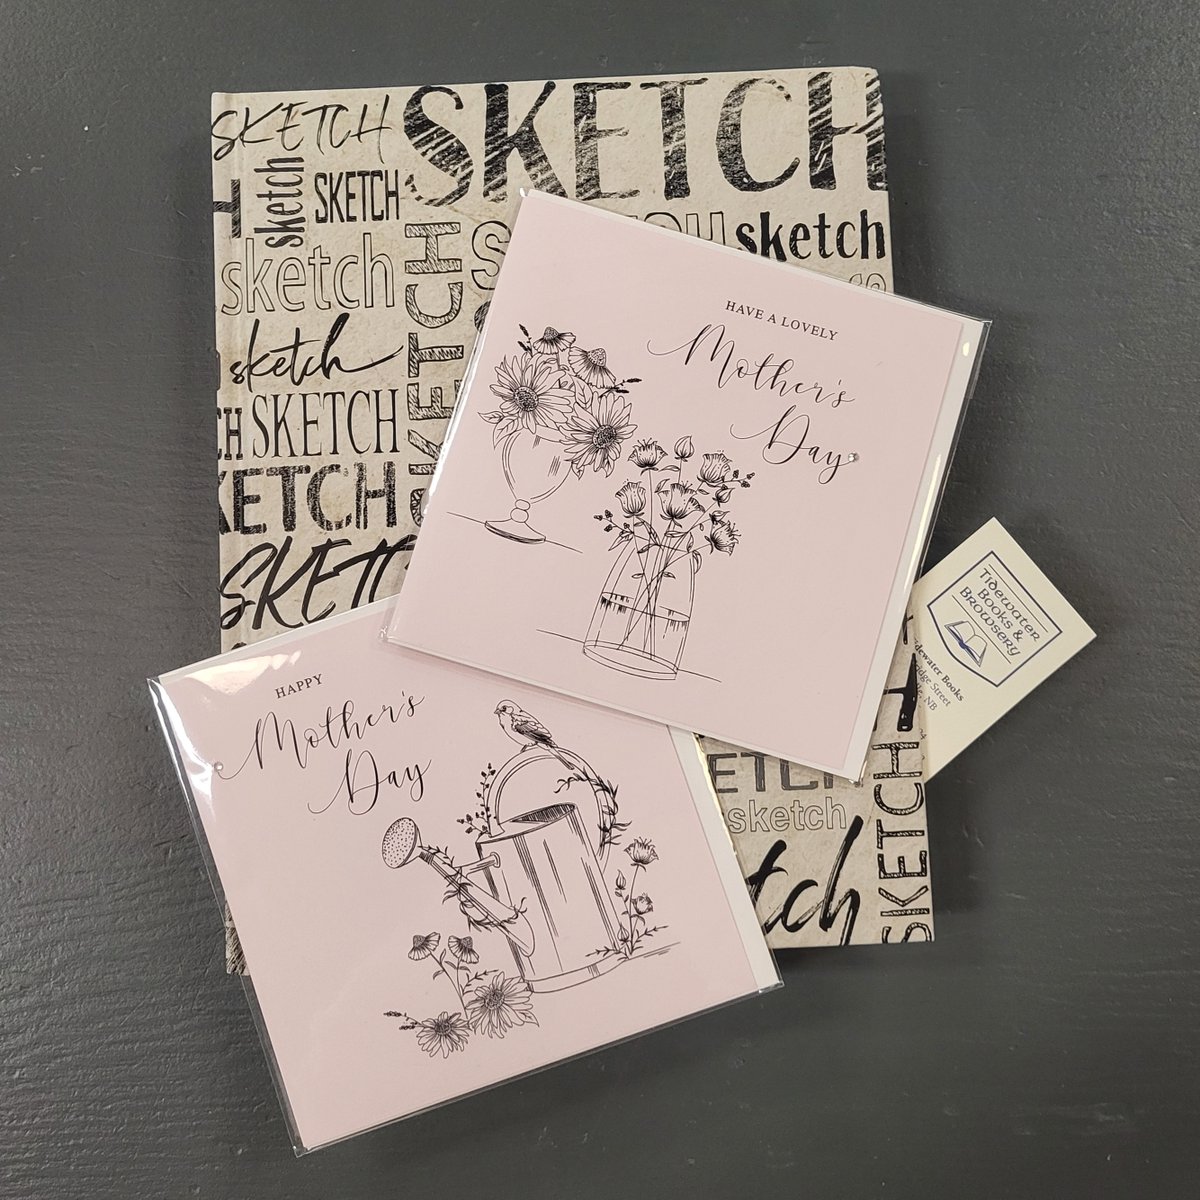 Have an artist Momma? What about a new sketch book  for #MothersDay?

Visit us in person or online at tidewaterbooks.ca! 💕🇨🇦📚

#ShopSmall #ShopLocal #ShopNB #ShopIndie #ThinkIndie #BookLovers #IndieBookstores #SackvilleNB #Fallinlovewithlocal #SmallBusinessEveryDay